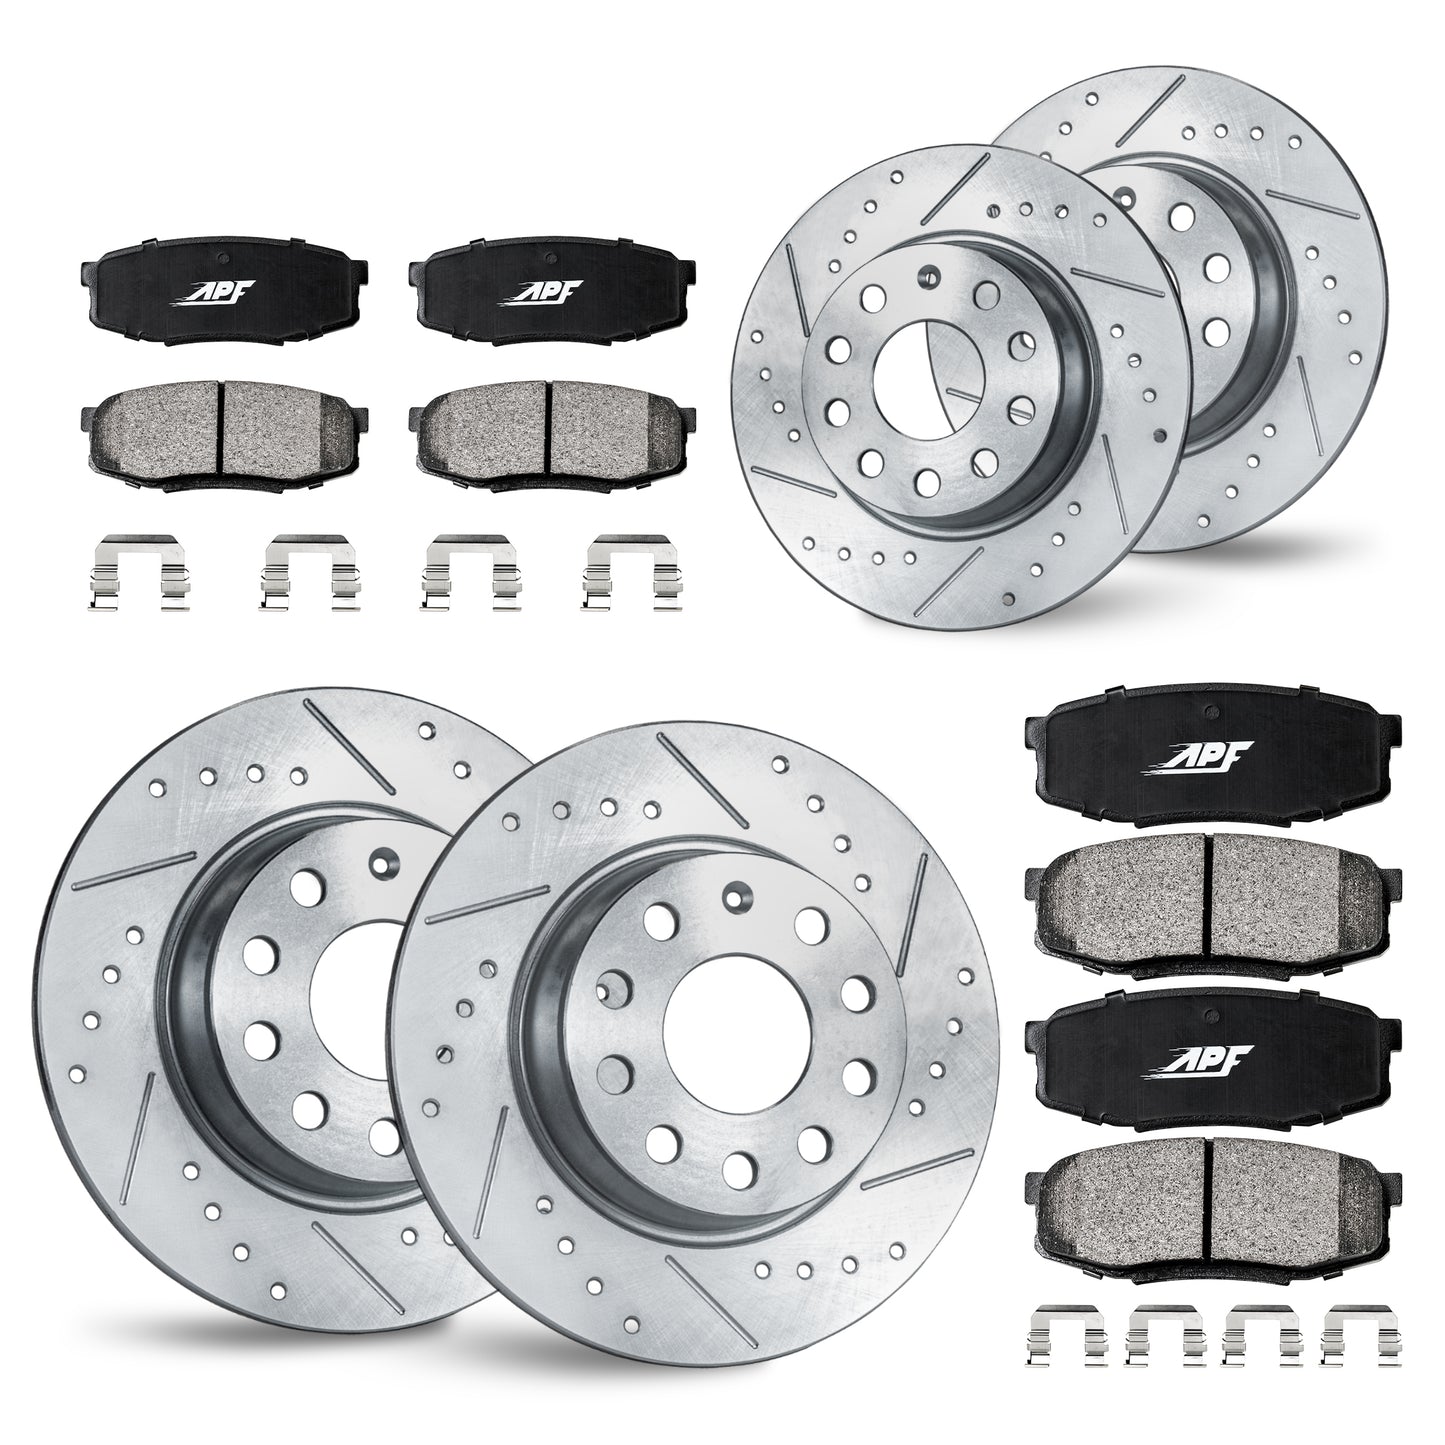 APF Full Kit compatible with Volkswagen Passat 2006-2008 | Zinc Drilled Slotted Rotors with Ceramic Carbon Fiber Brake Pads